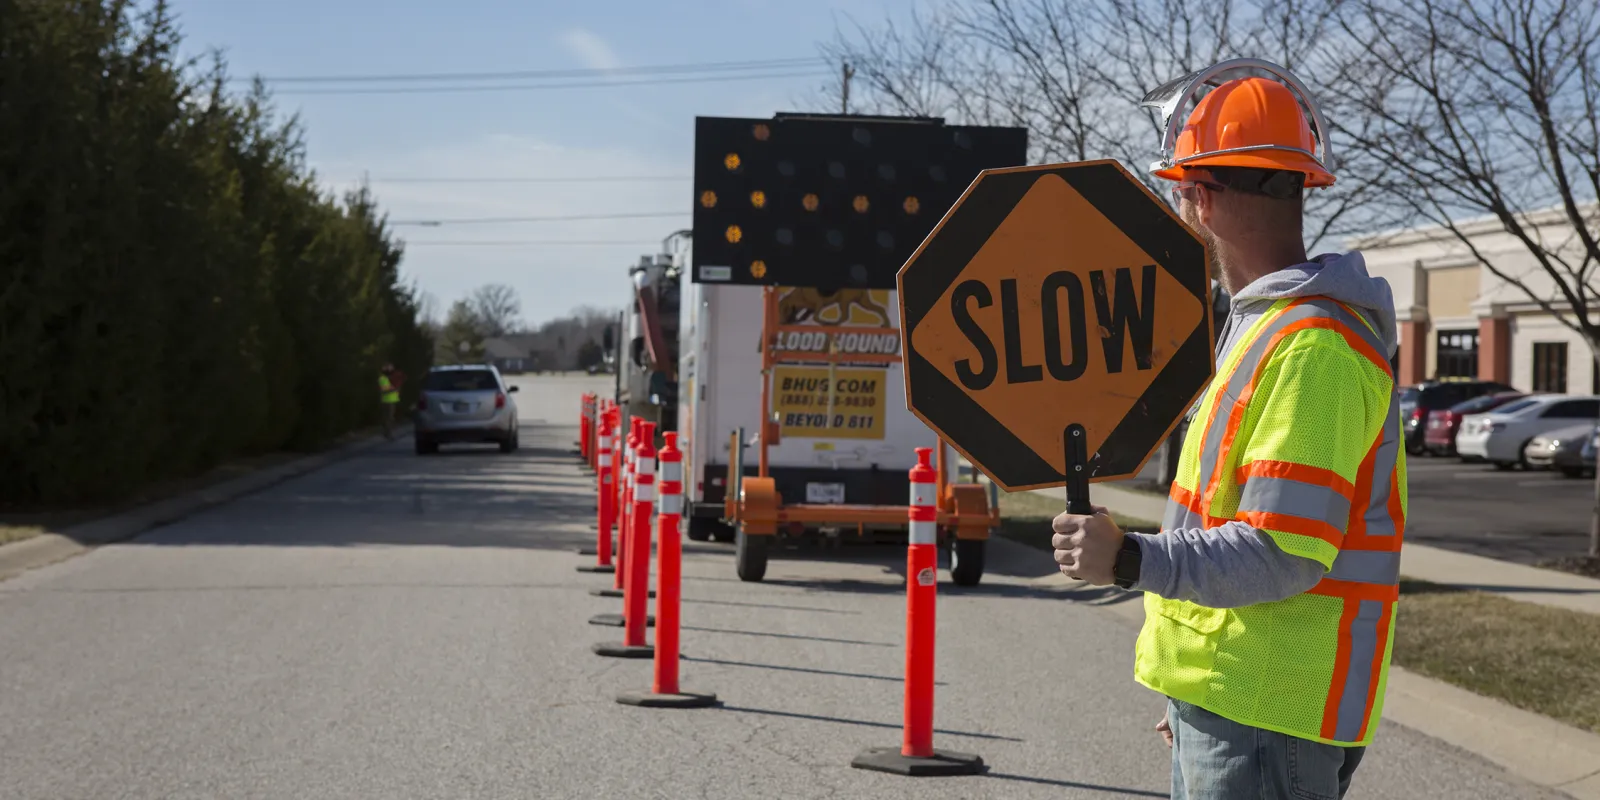 Man in construction gear holding a slow sign to manage traffic safety